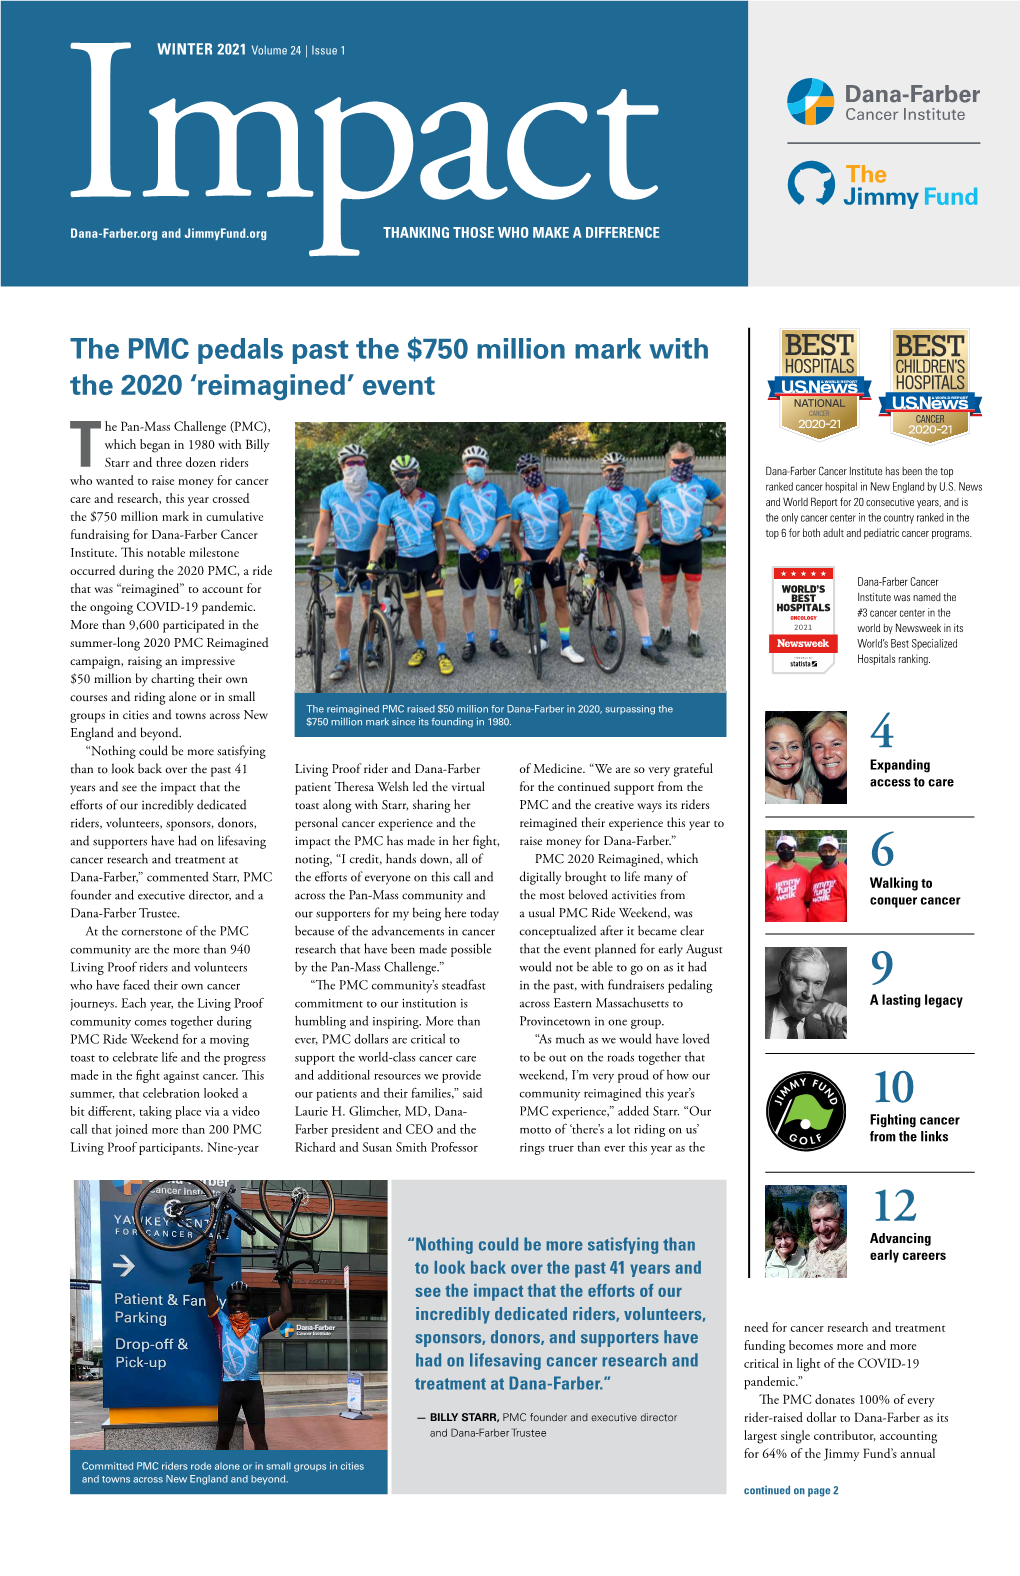 The PMC Pedals Past the $750 Million Mark with the 2020 'Reimagined'